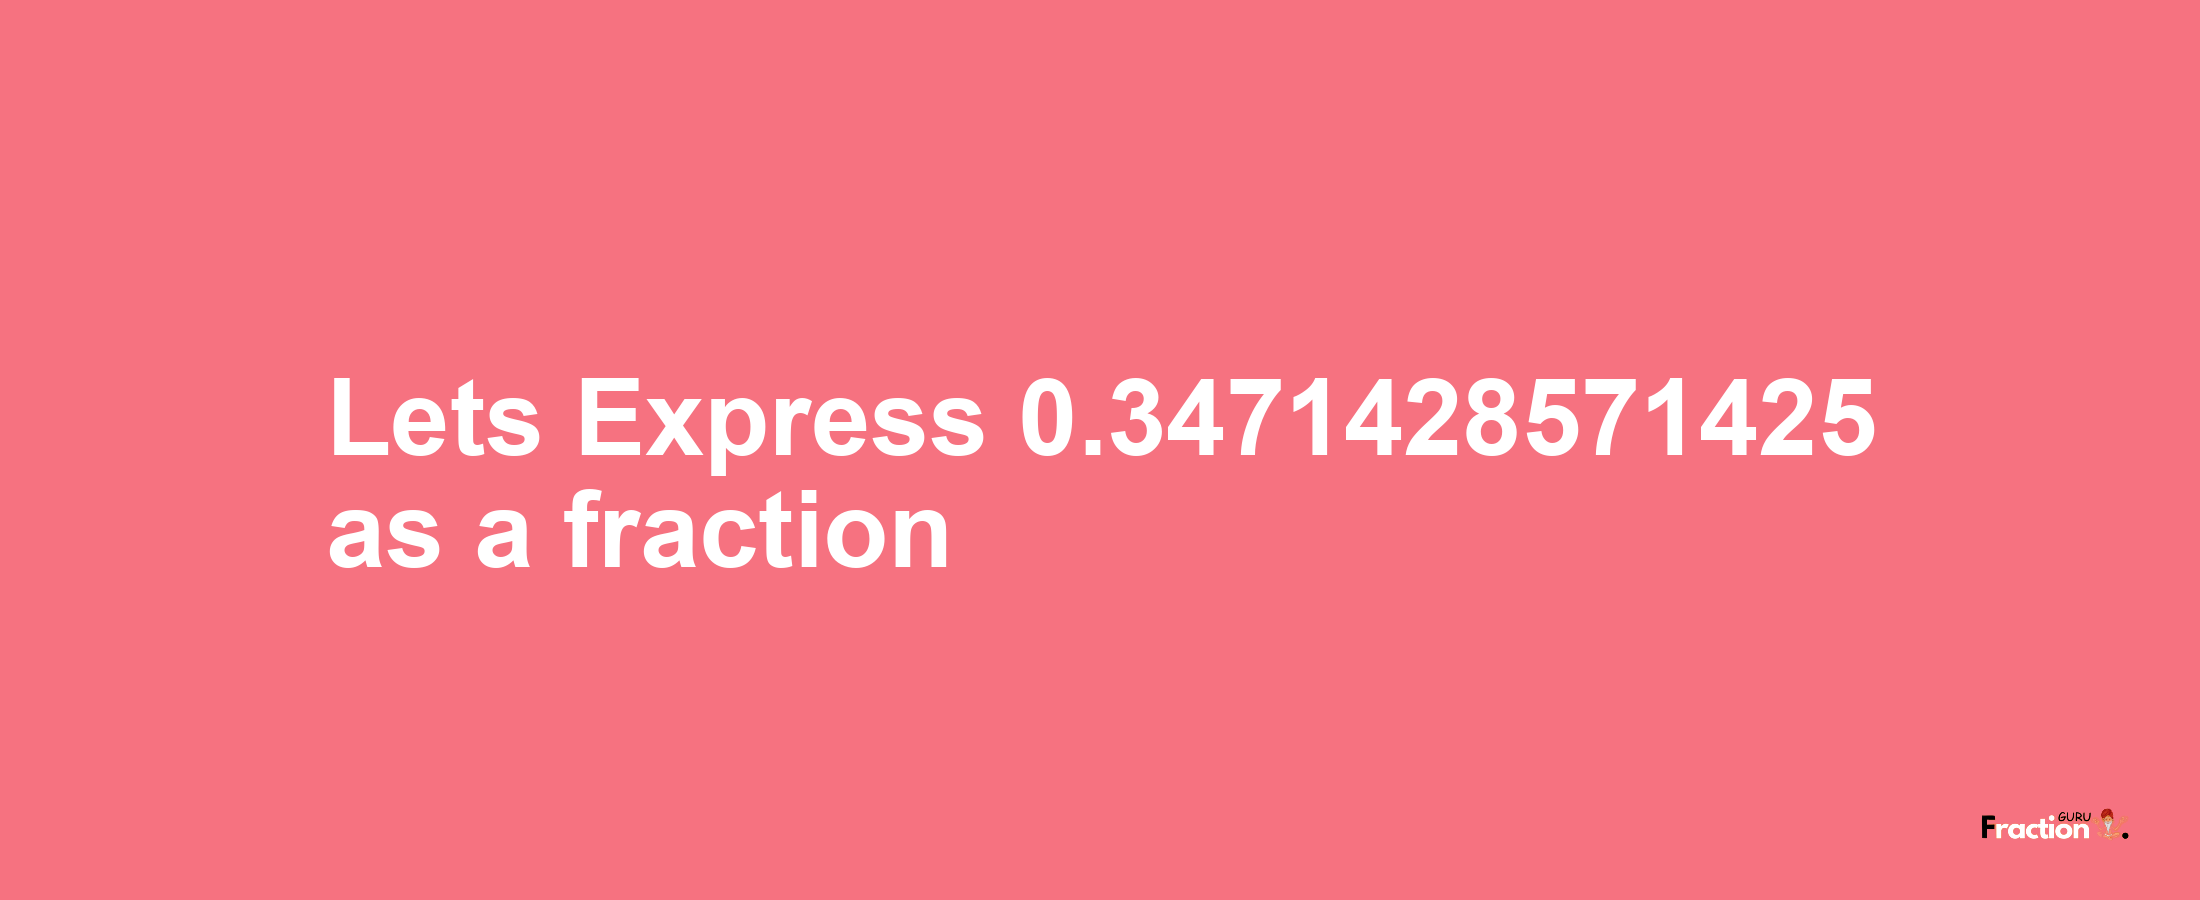 Lets Express 0.3471428571425 as afraction